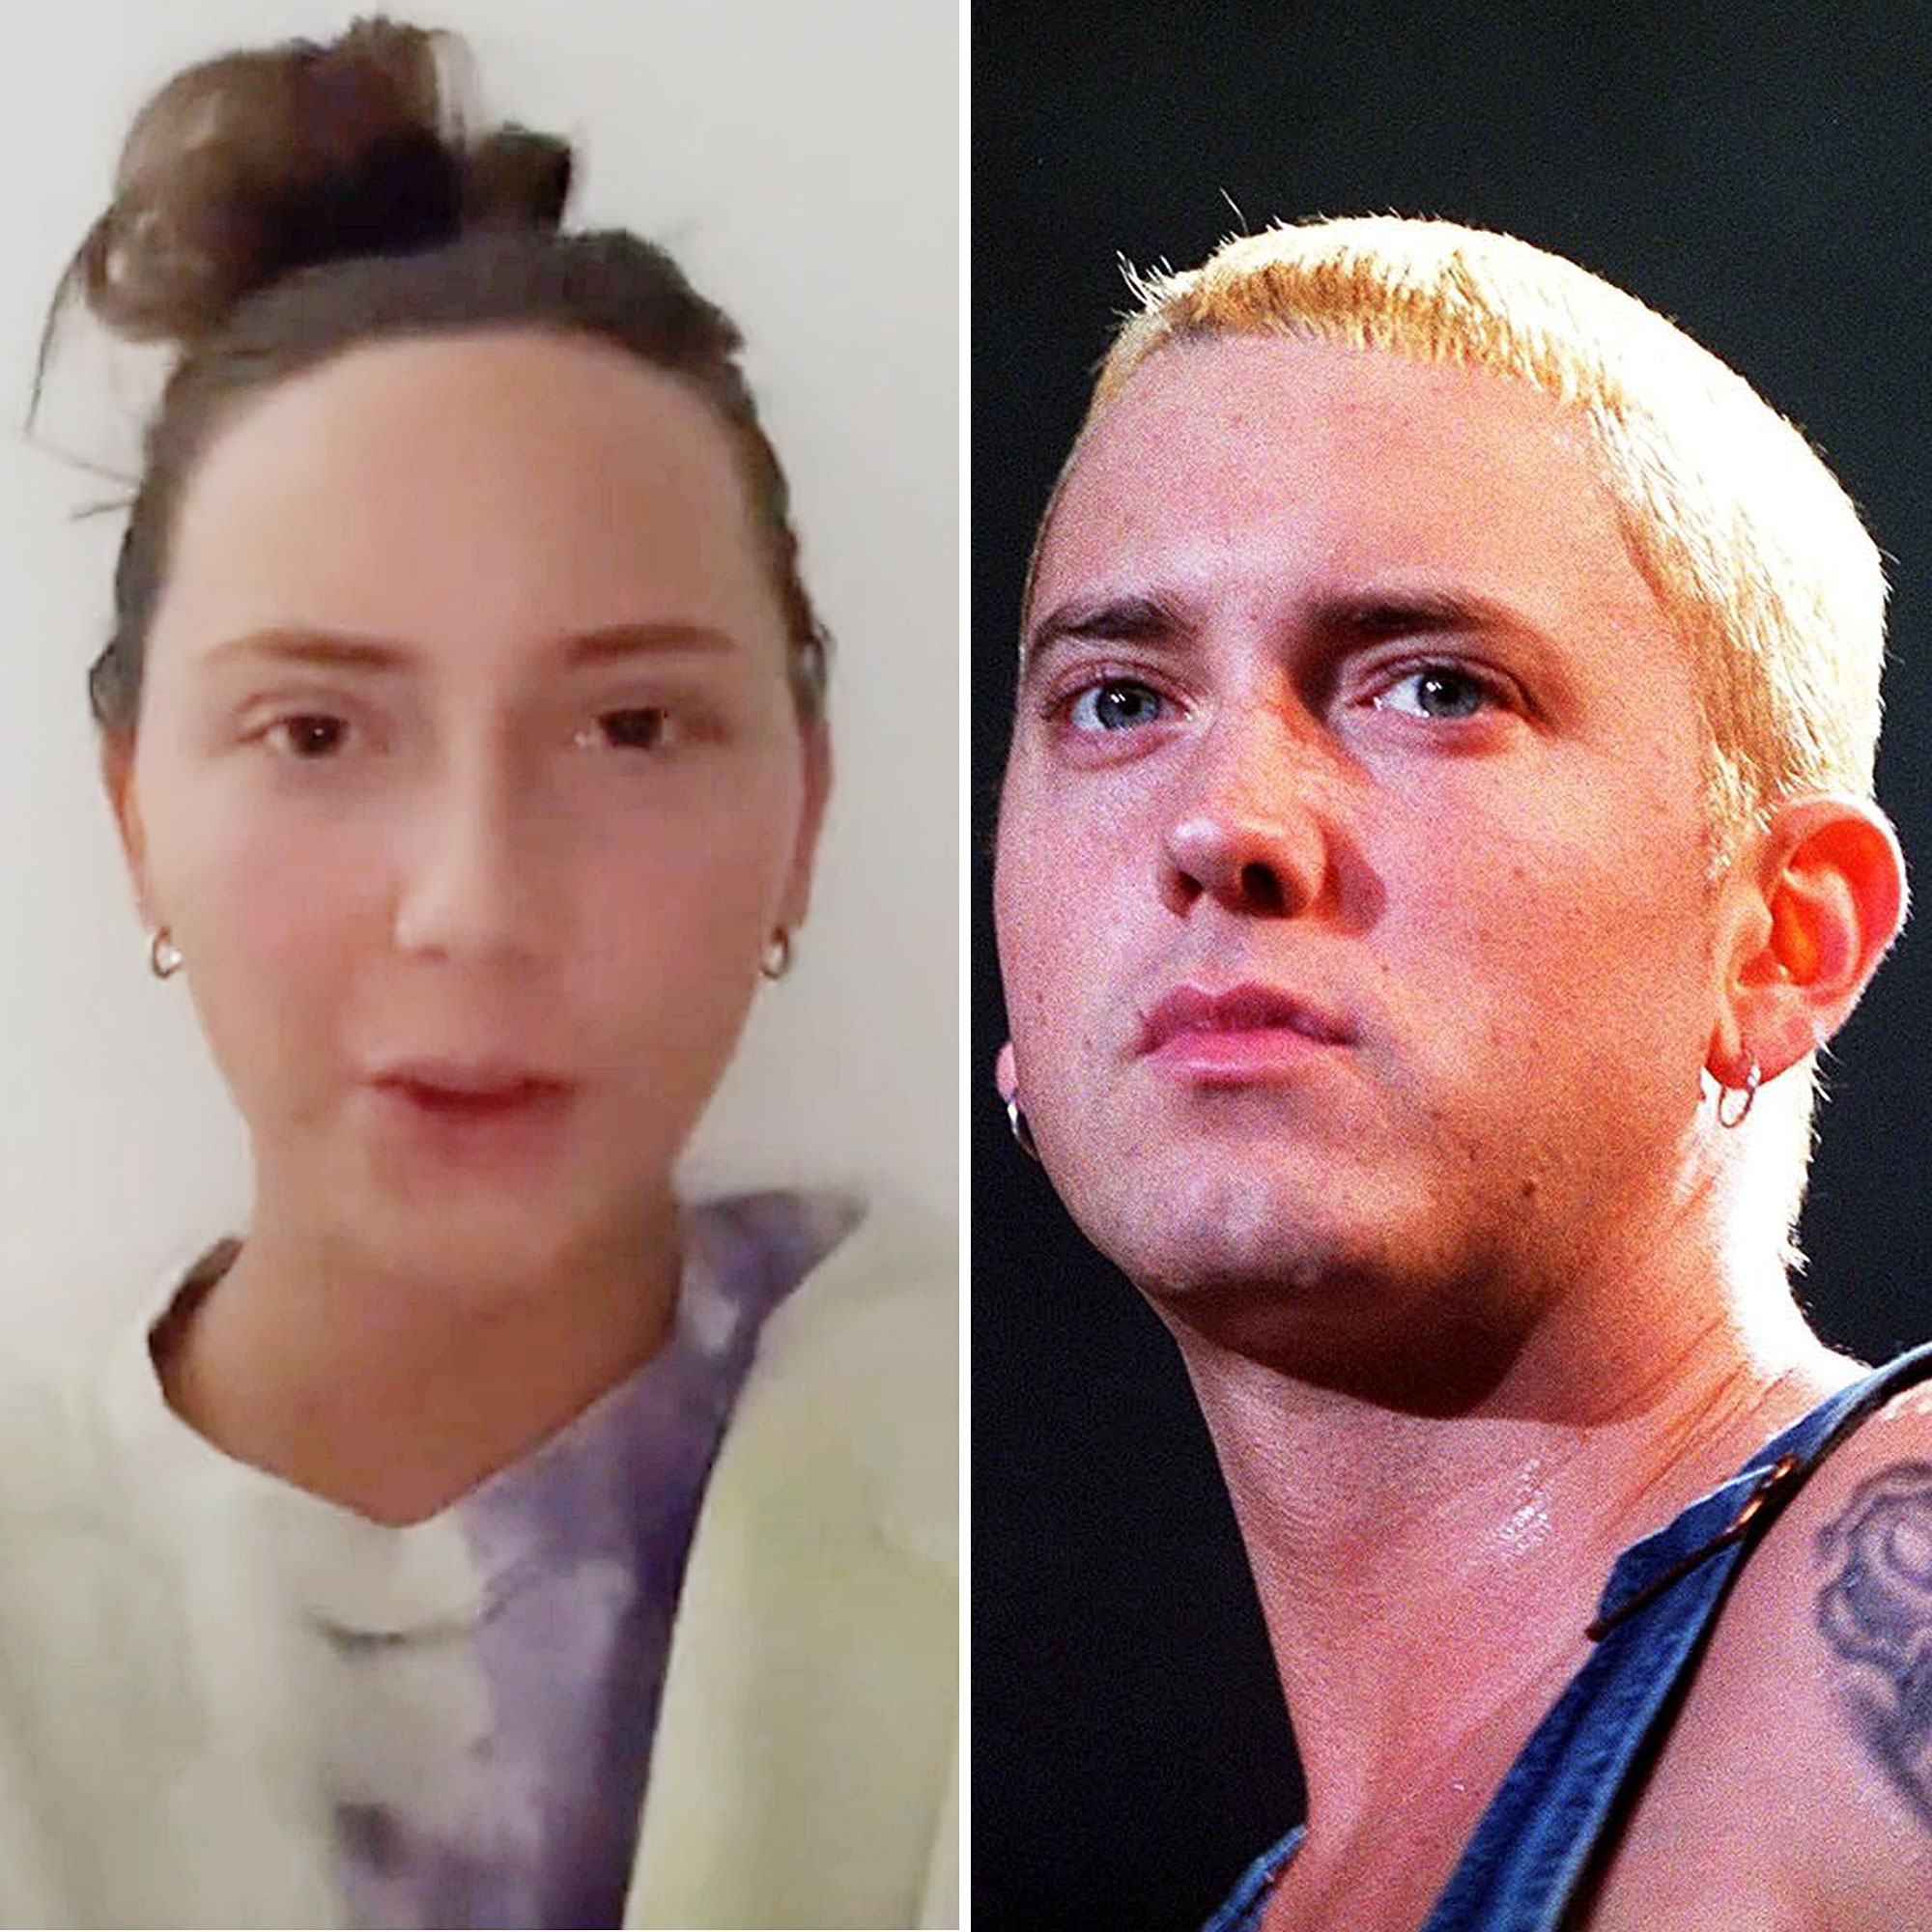 Hailie Mathers Looks Like Dad Eminem in No Makeup Video